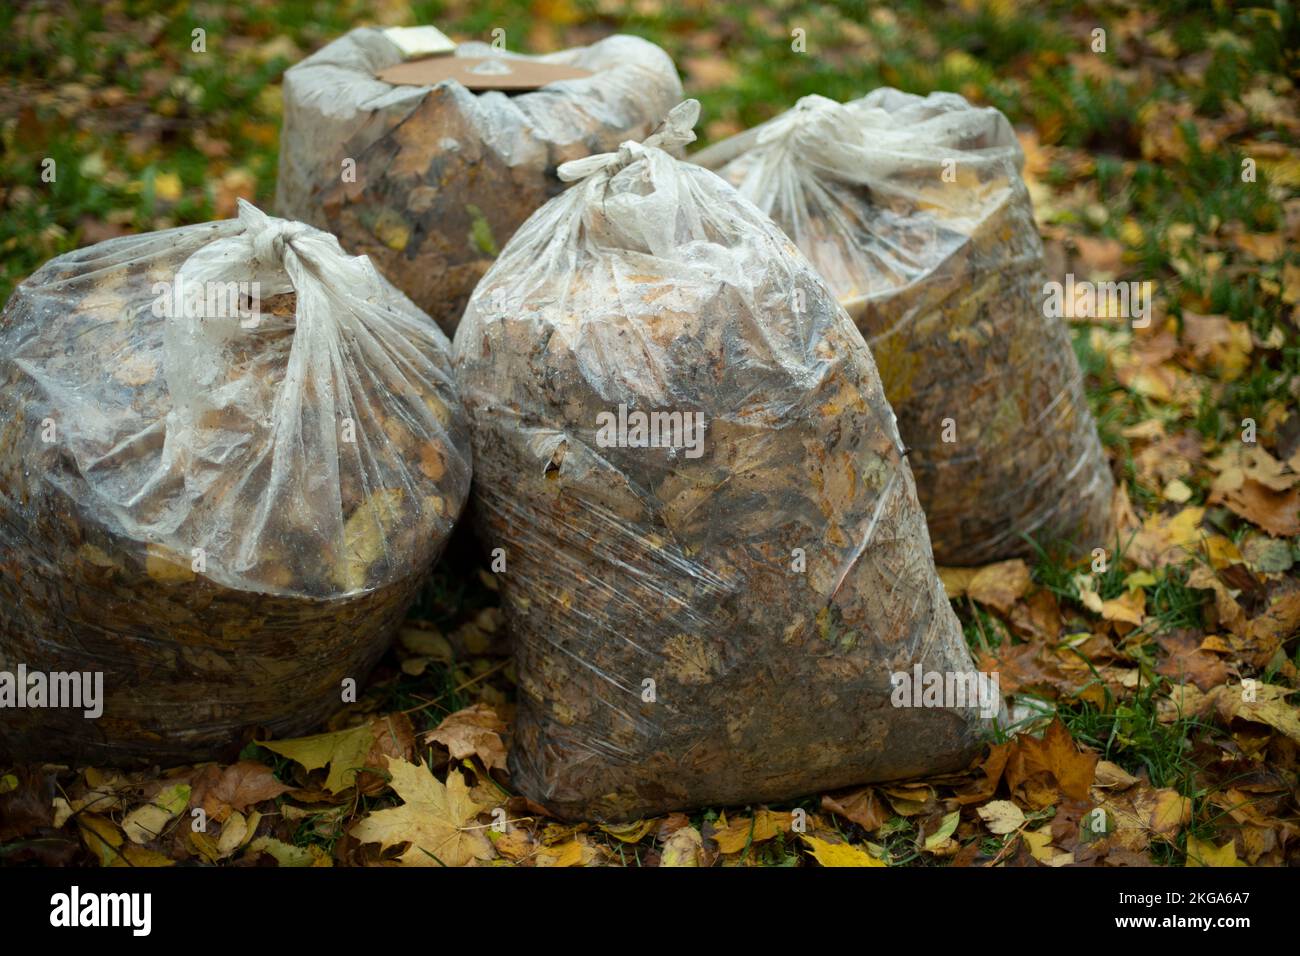 https://c8.alamy.com/comp/2KGA6A7/bags-of-leaves-transparent-bag-with-foliage-cleaning-in-yard-in-autumn-plastic-garbage-bags-2KGA6A7.jpg